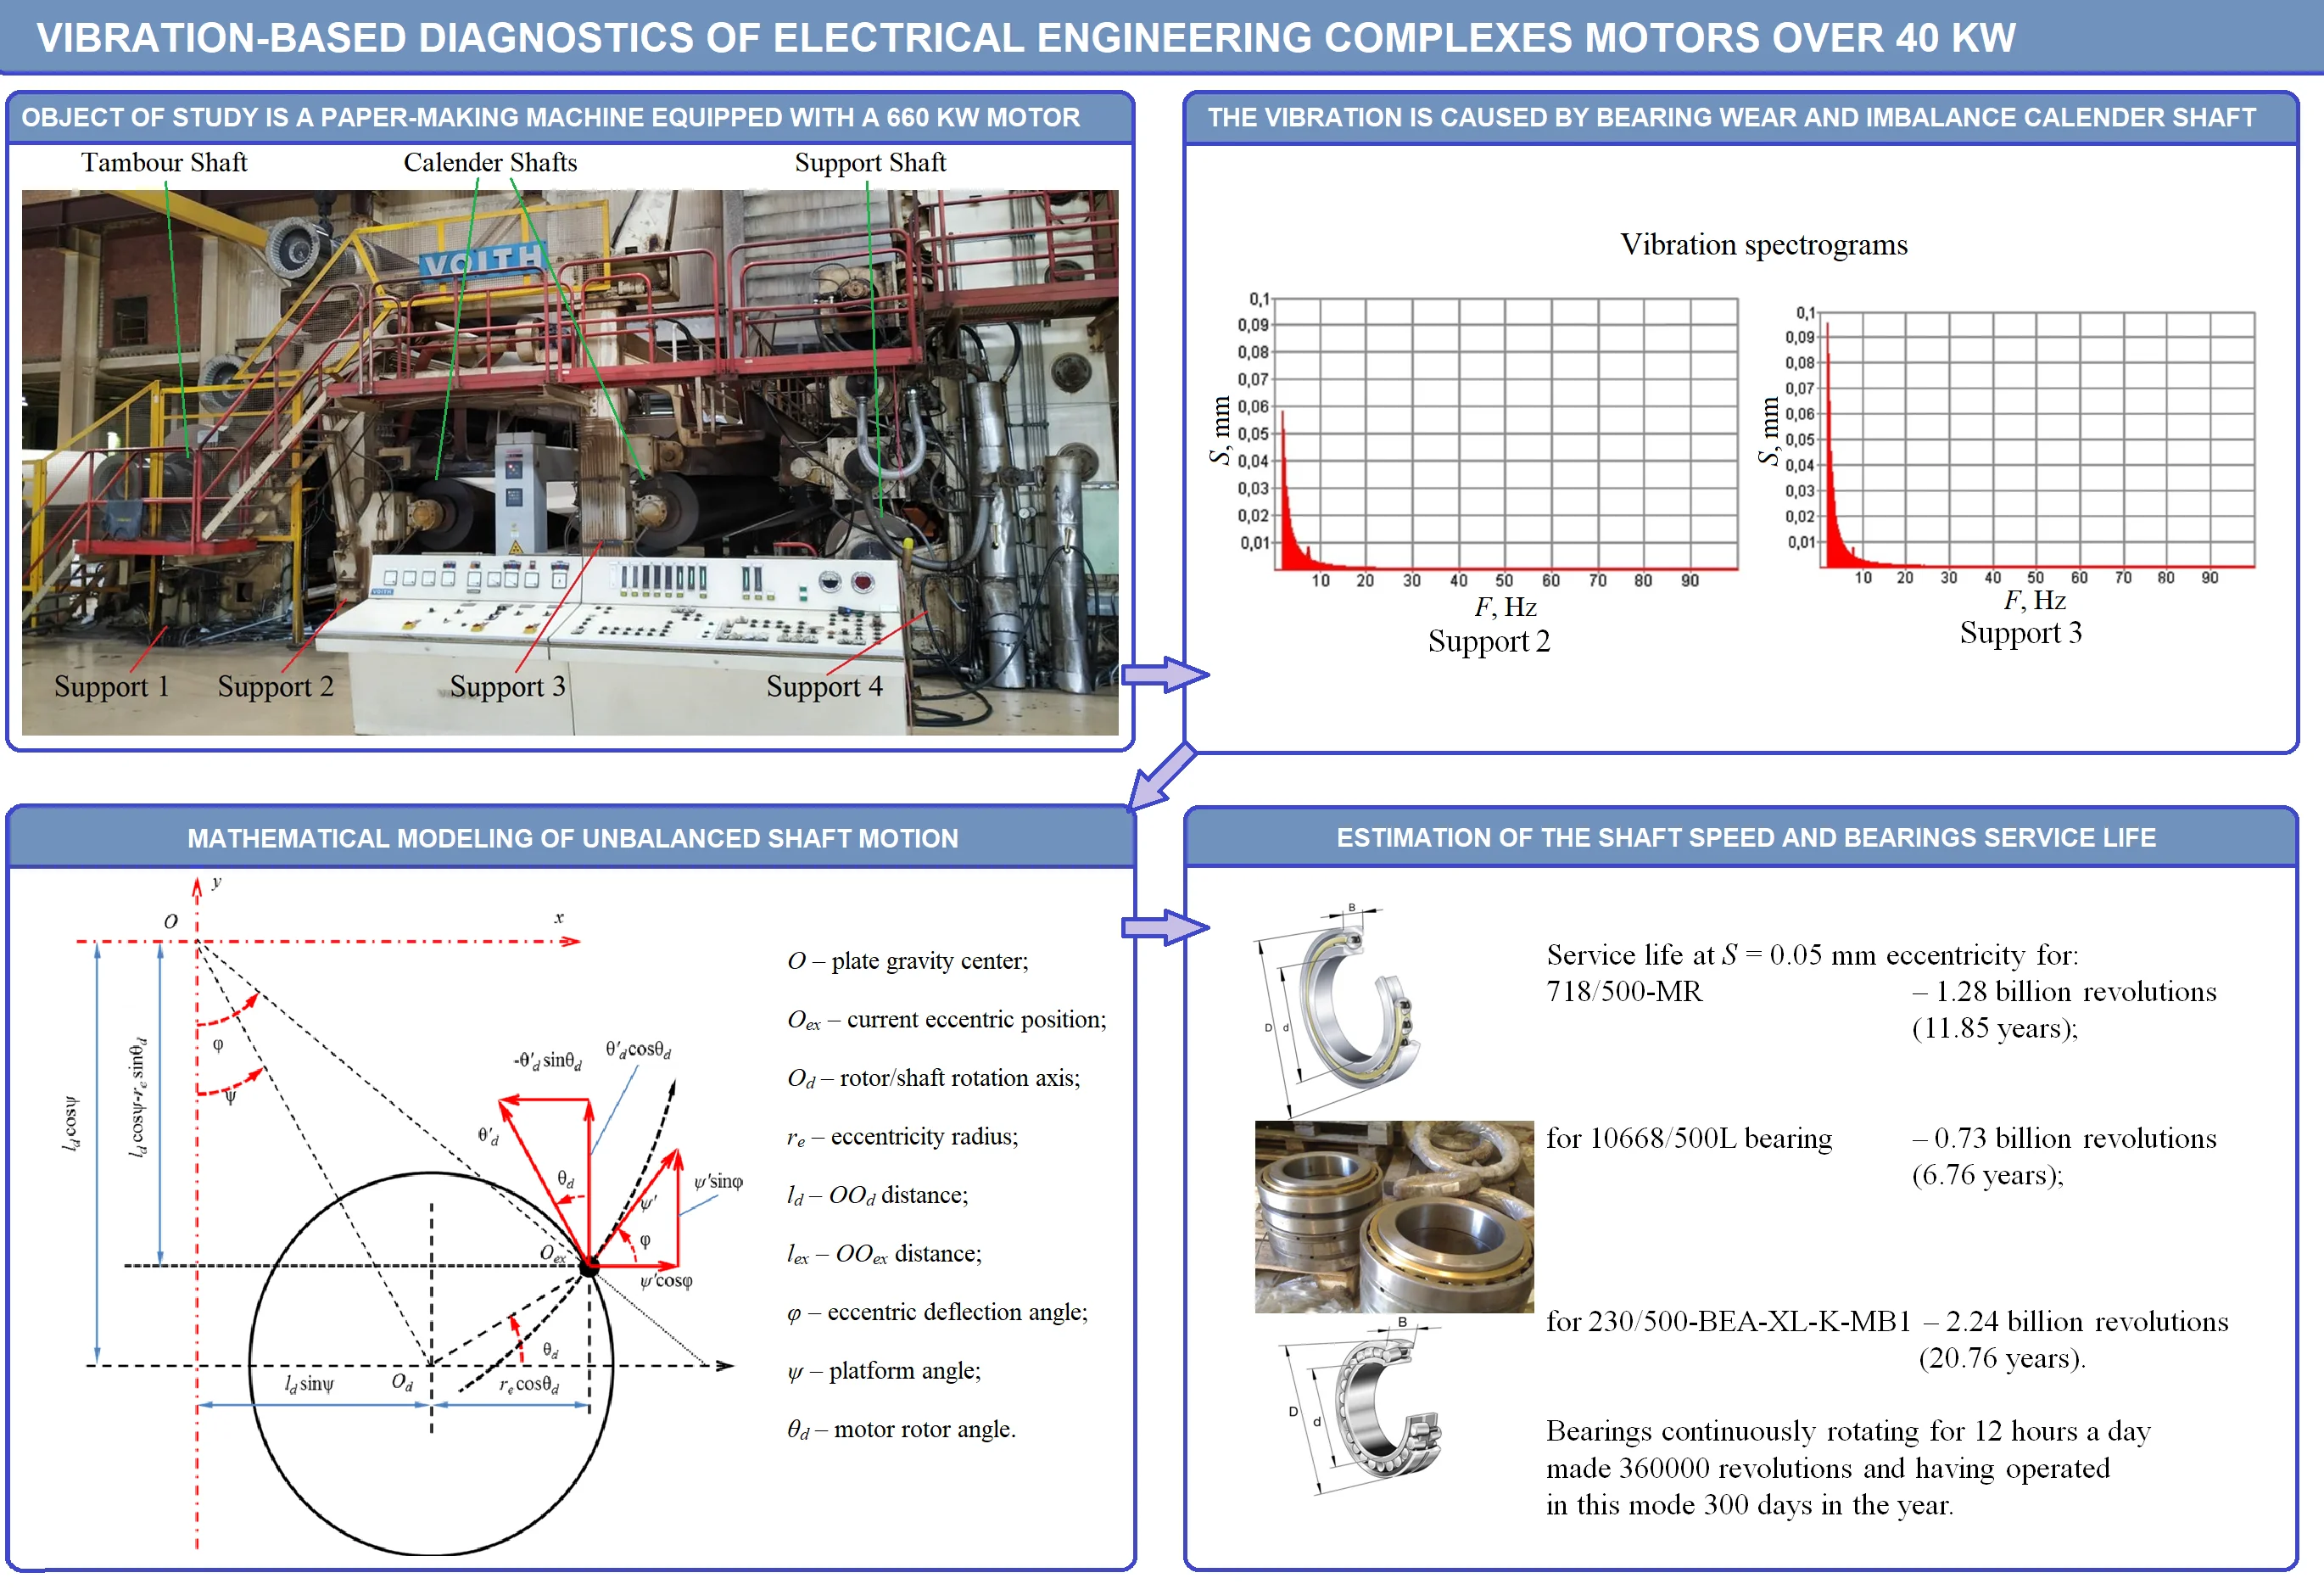 Vibration-based diagnostics of electrical engineering complexes motors over 40 kW